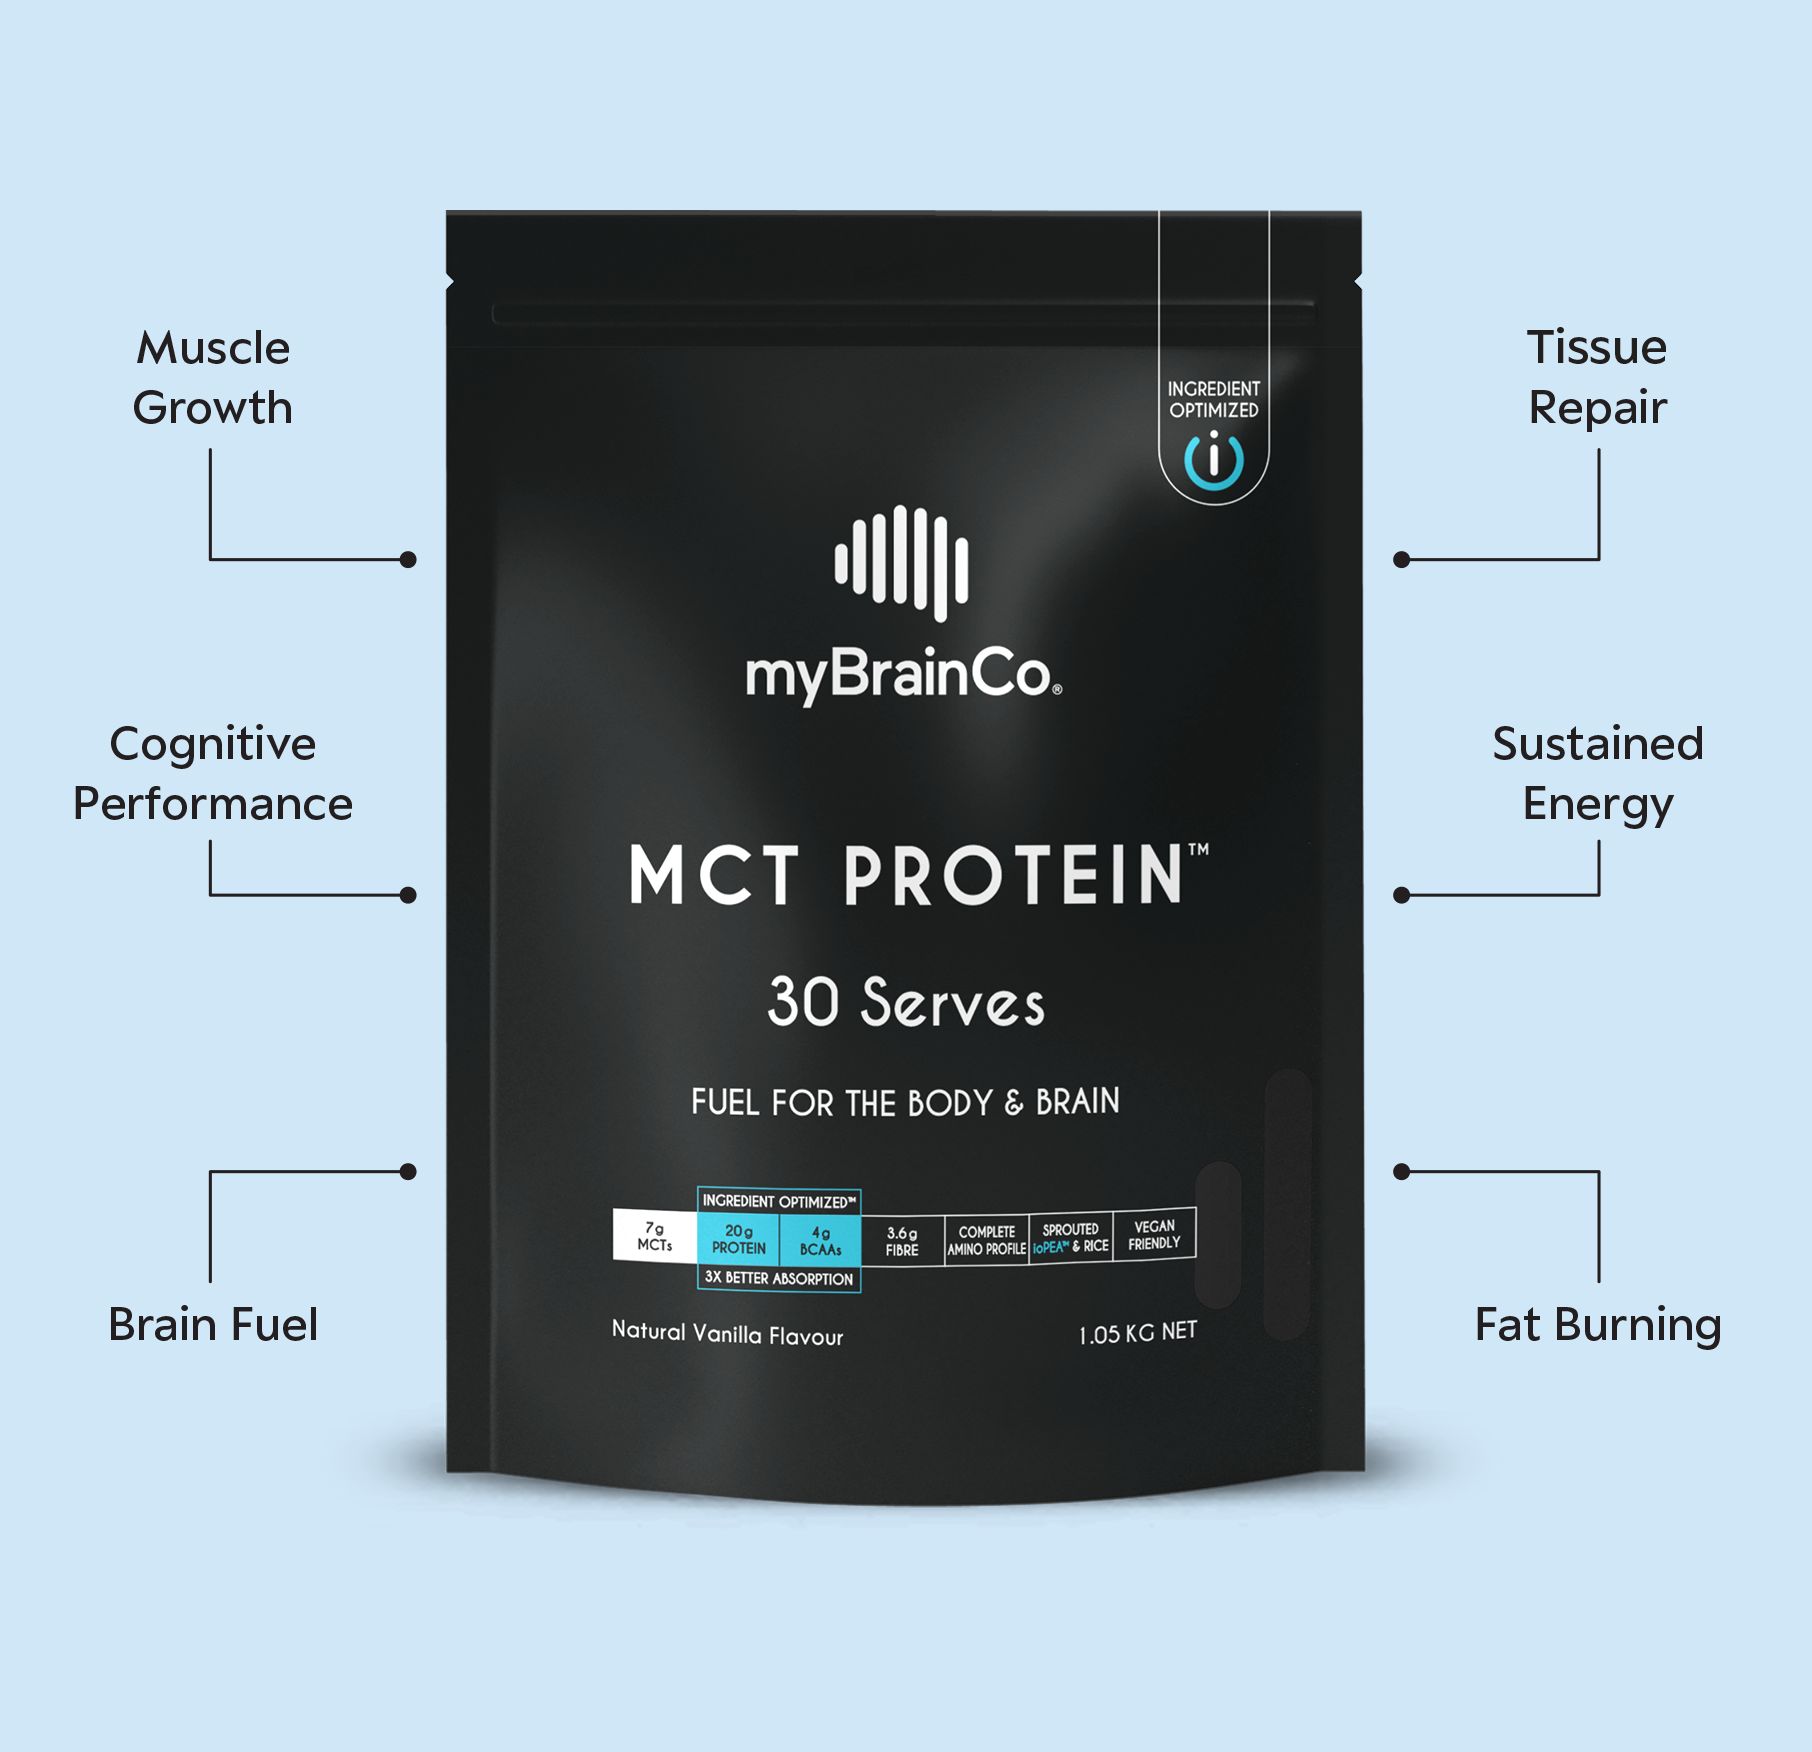 MCT PROTEIN™